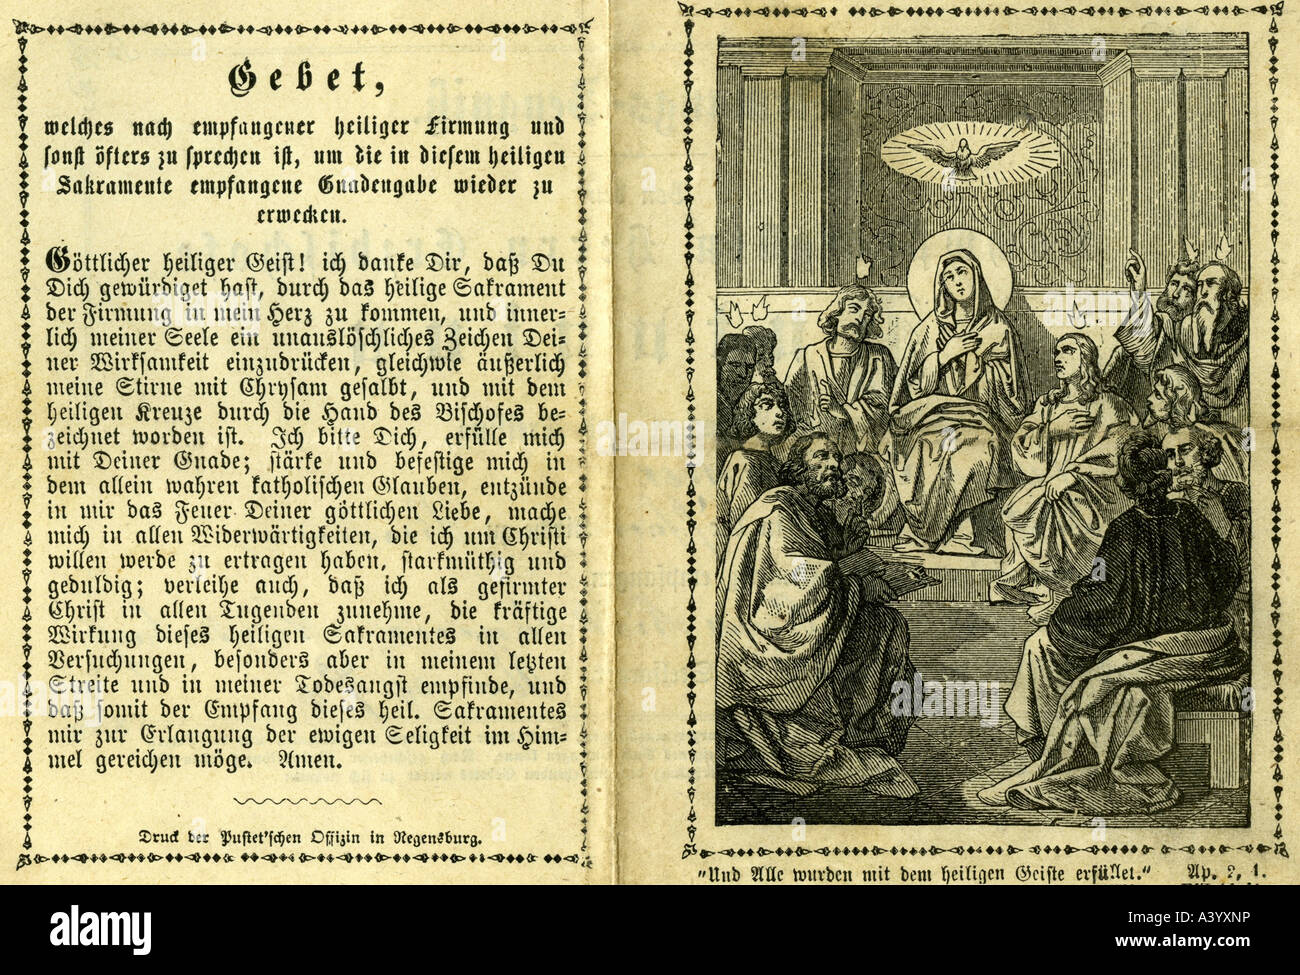 religion, christianity, prayer pictures, confirmation certificate, 'Und alle wurden mit dem Heiligen Geist erfüllt', ('and all were steeped by the Holy Spirit'), Regensburg, 1881,  Europe, Germany, 19th century, tradition, picture, memory, remembrance, dove, SAint Mary, disciples, tongues of fire, erfuellt, erfullt, , Stock Photo